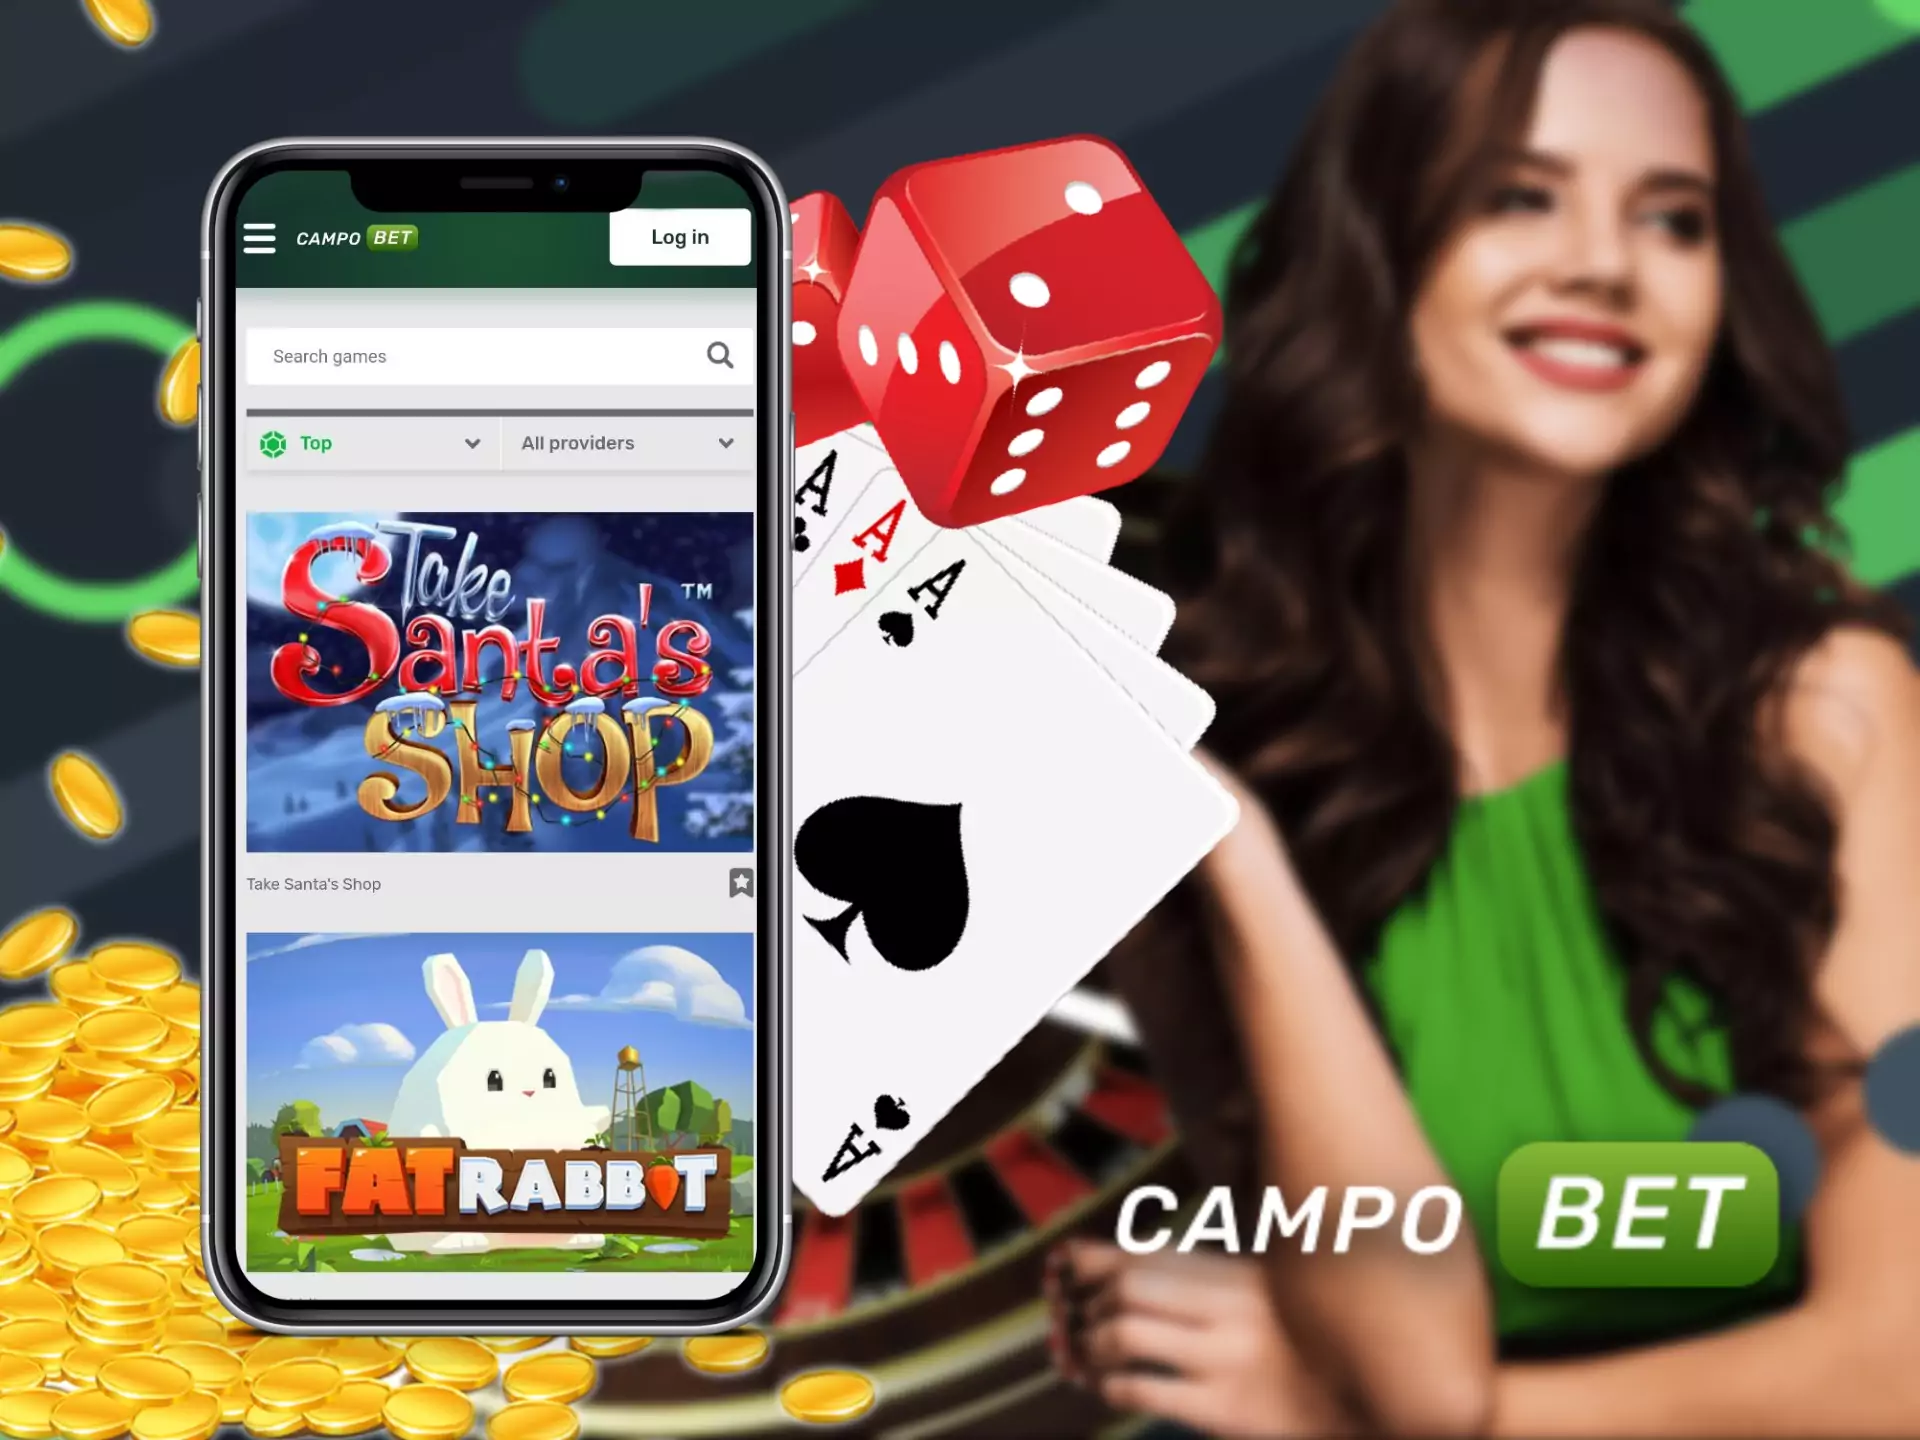 You can play slots, baccarat, blackjack and other casino games via mobile app.